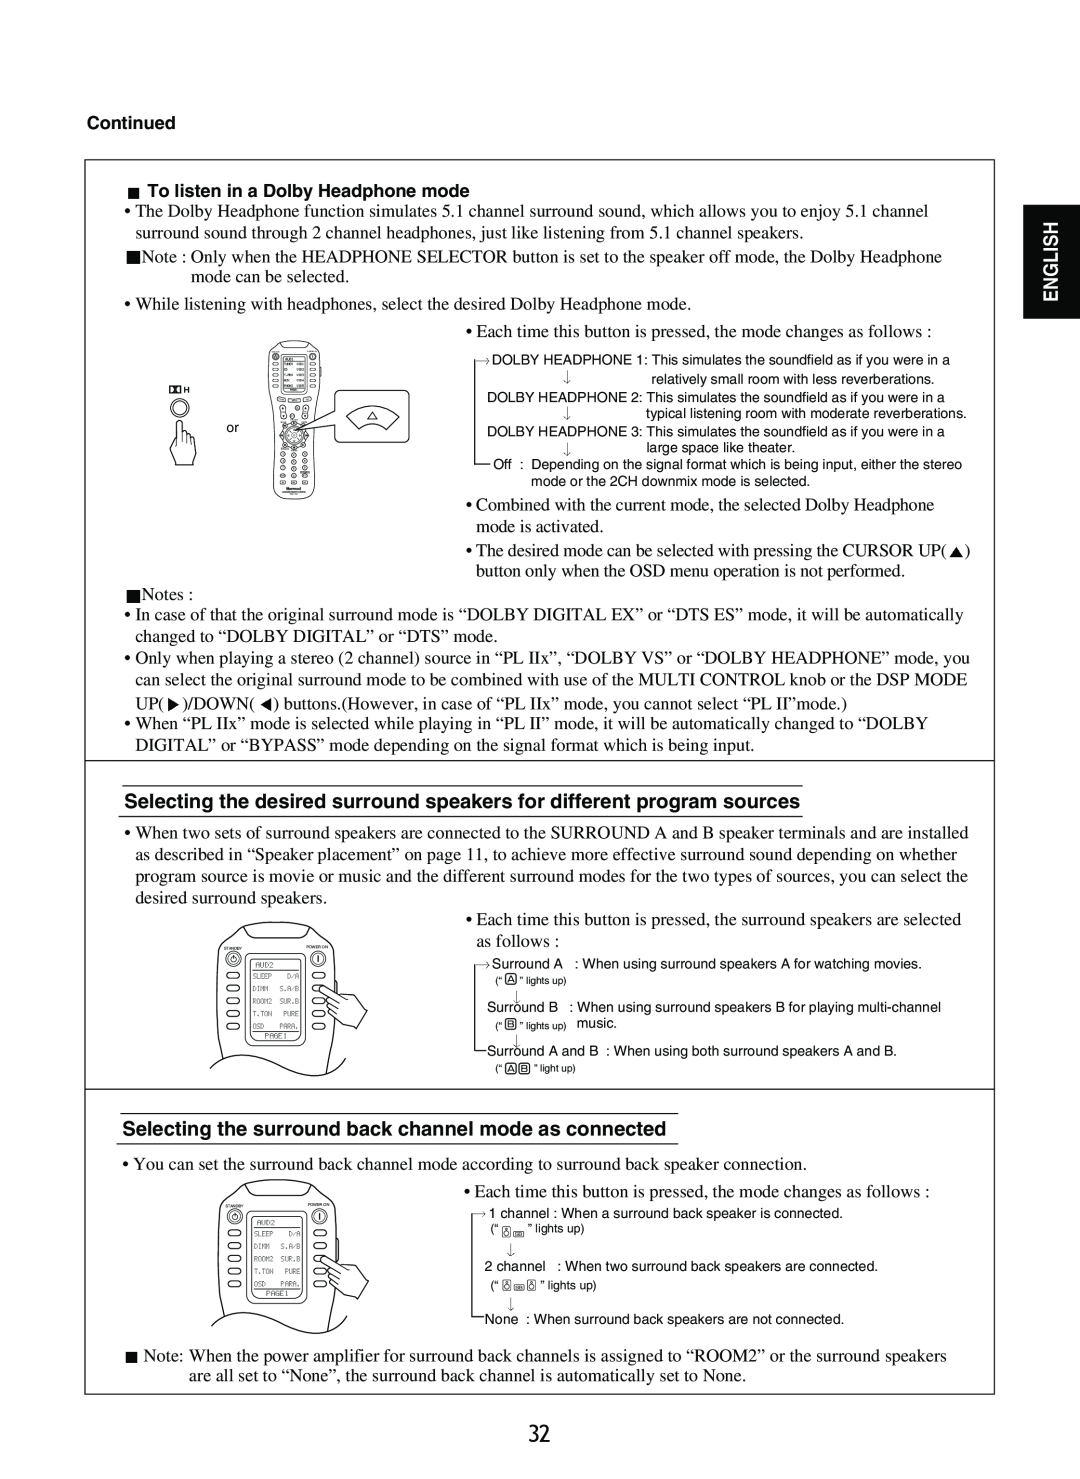 Sherwood R-965 manual Continued To listen in a Dolby Headphone mode 